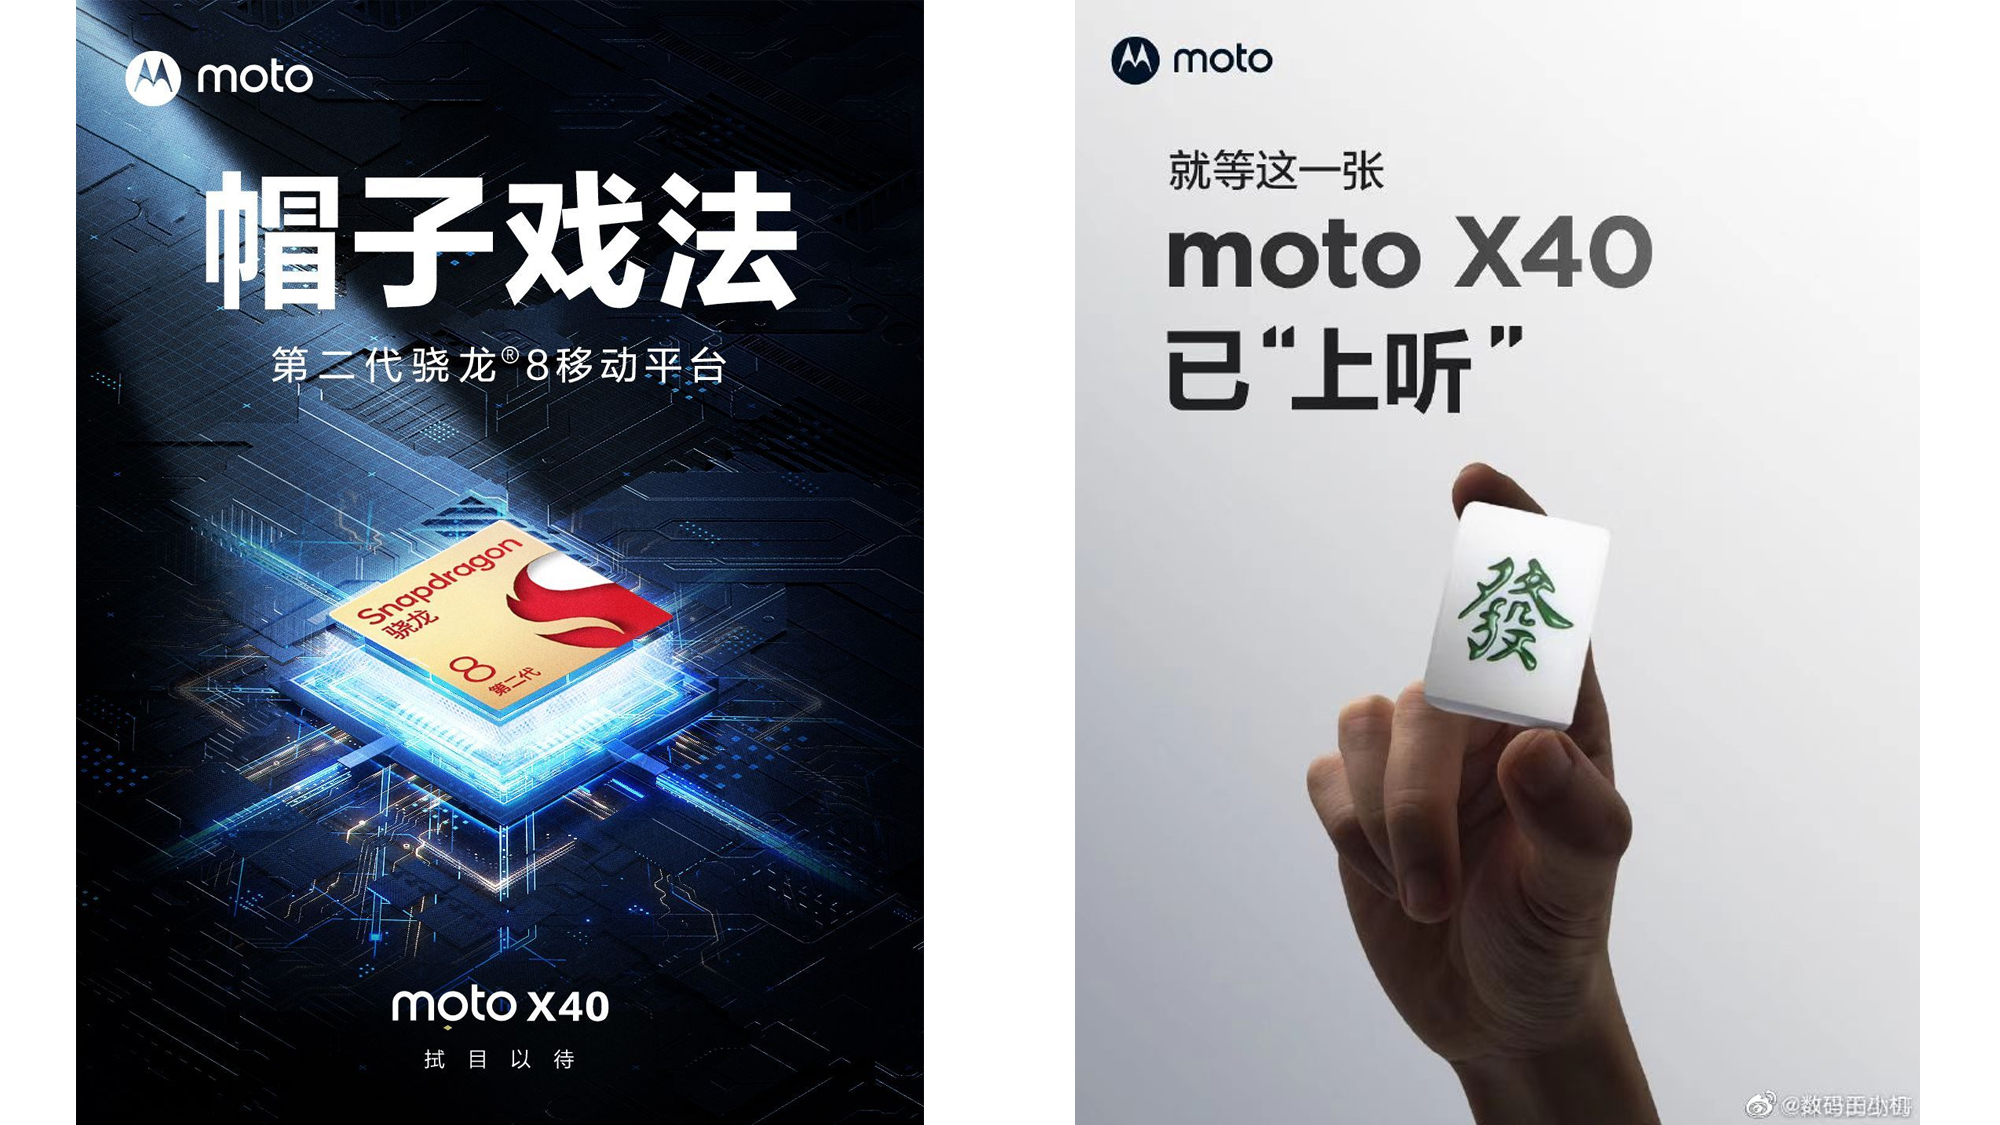 Chinese posters tease Motorola Moto X40 and link it to Qualcomm Snapdragon 8 Gen 2. From Weibo